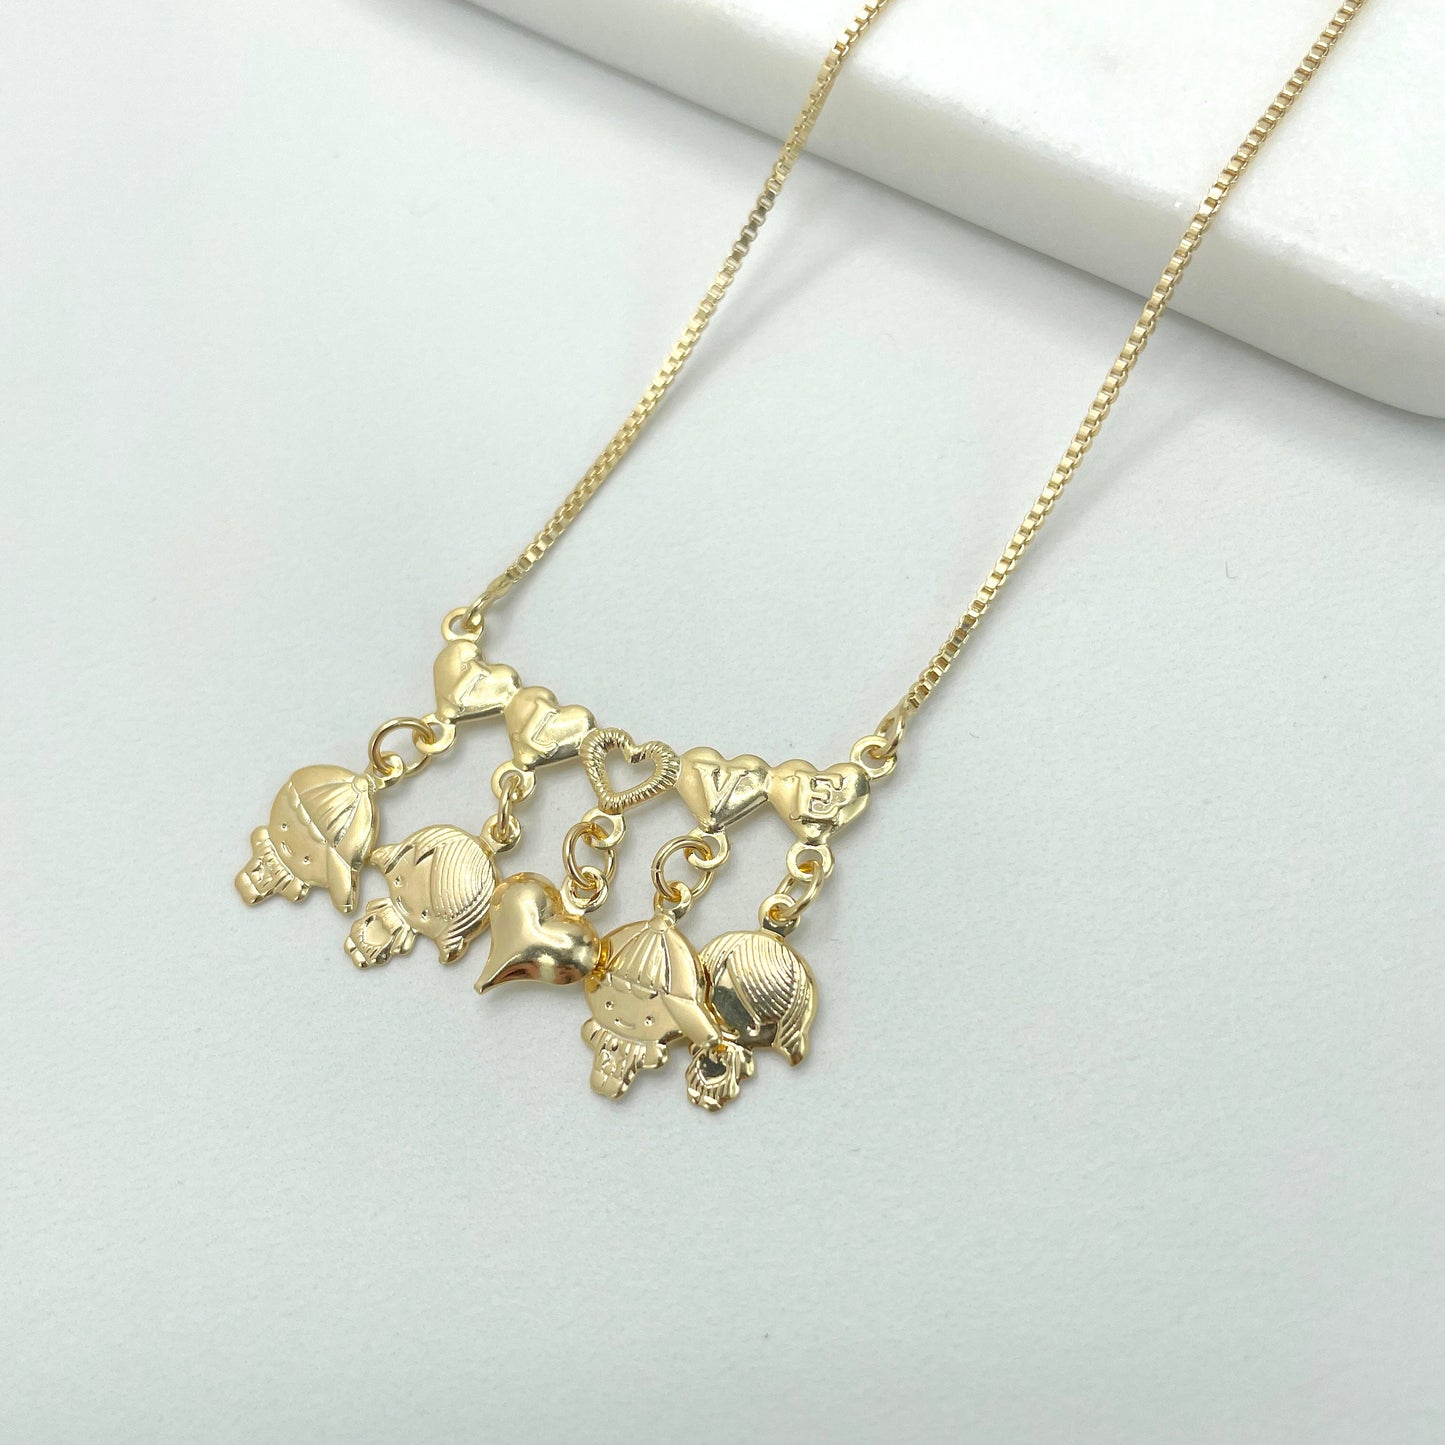 18k Gold Filled 1mm Box Chain Necklace," I LOVE" Hearts and Kids Charms, More Styles, Wholesale Jewelry Supplies